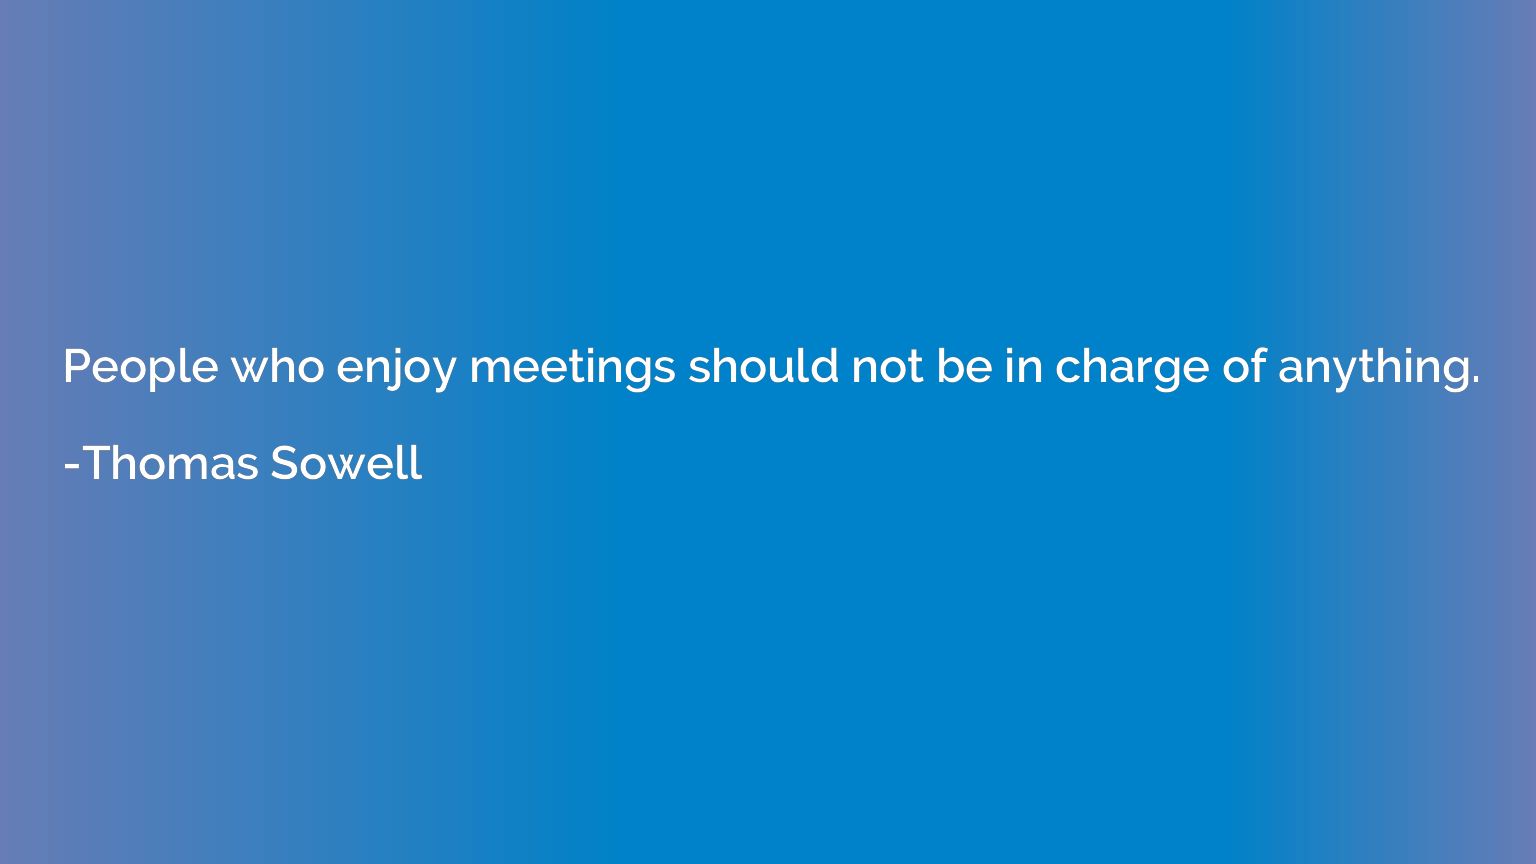 People who enjoy meetings should not be in charge of anythin